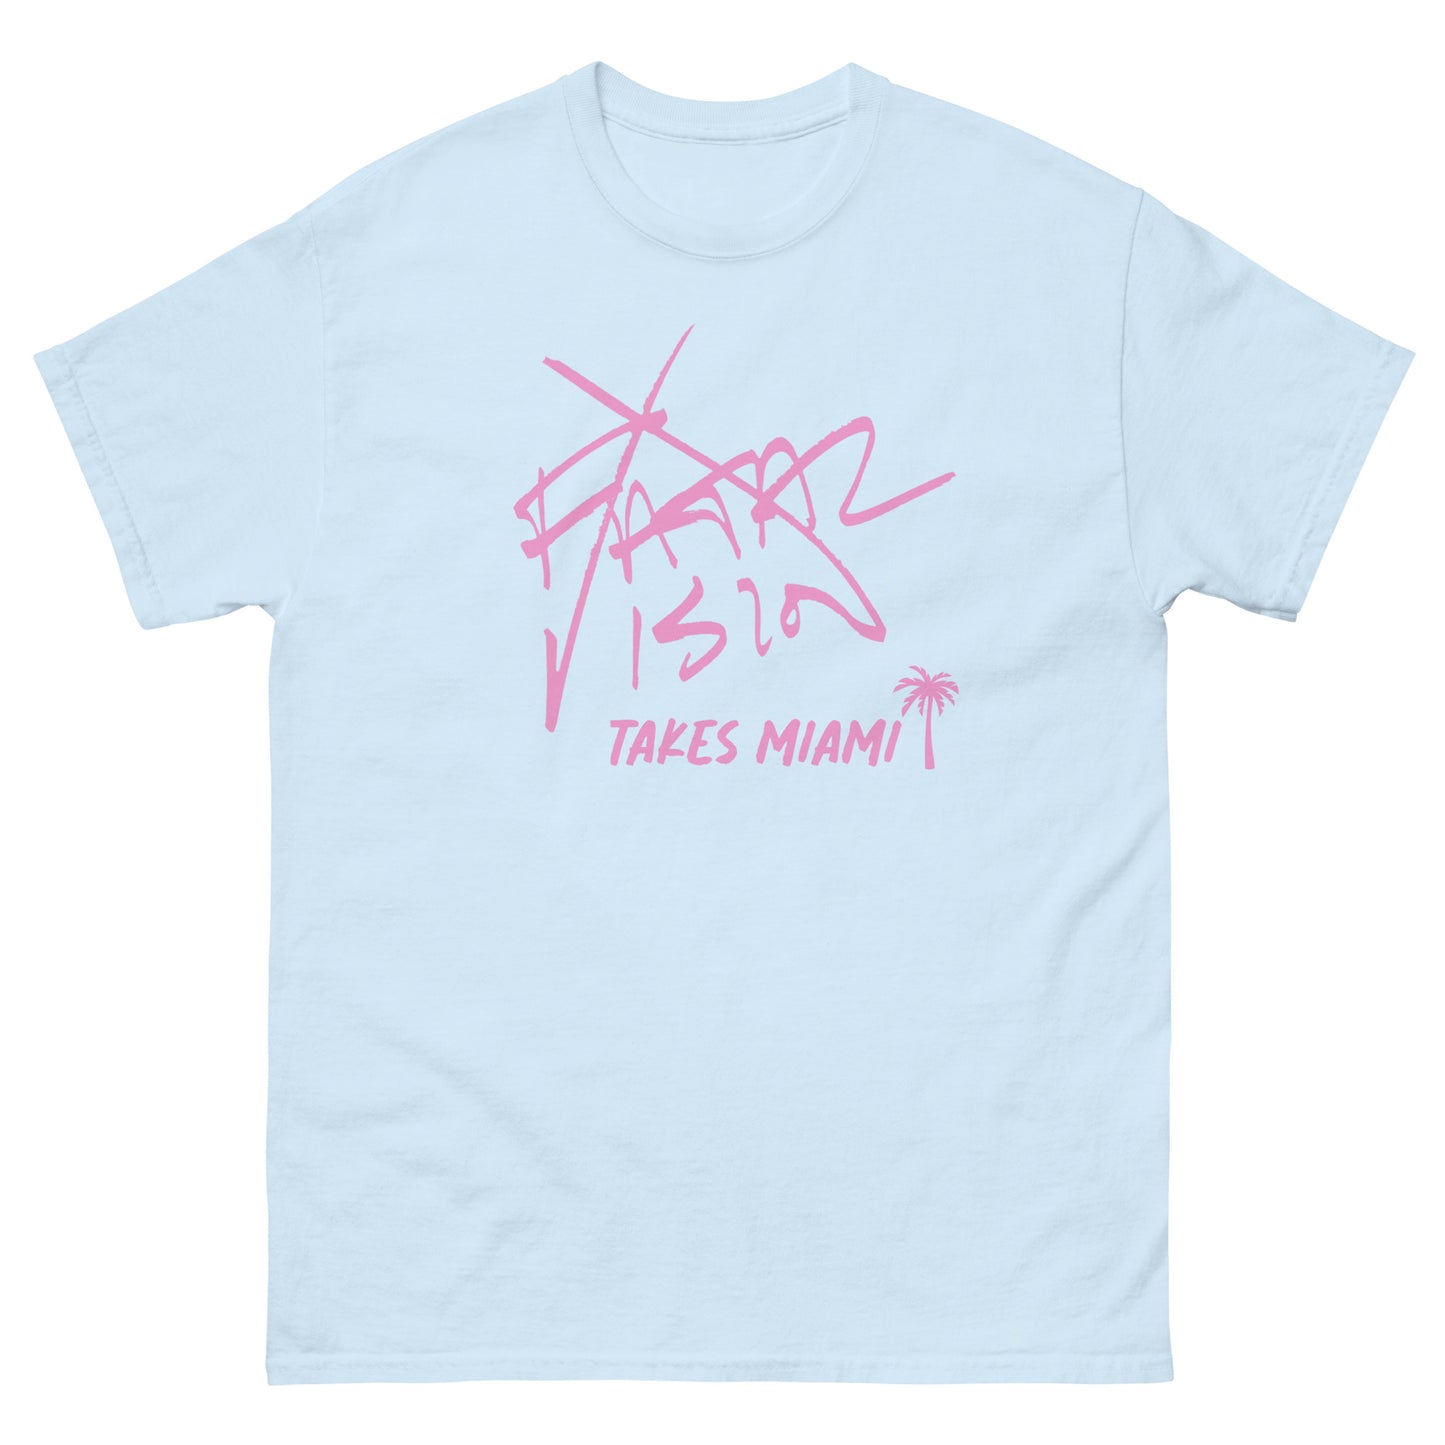 The Fatal Vision Takes Miami Limited Tee